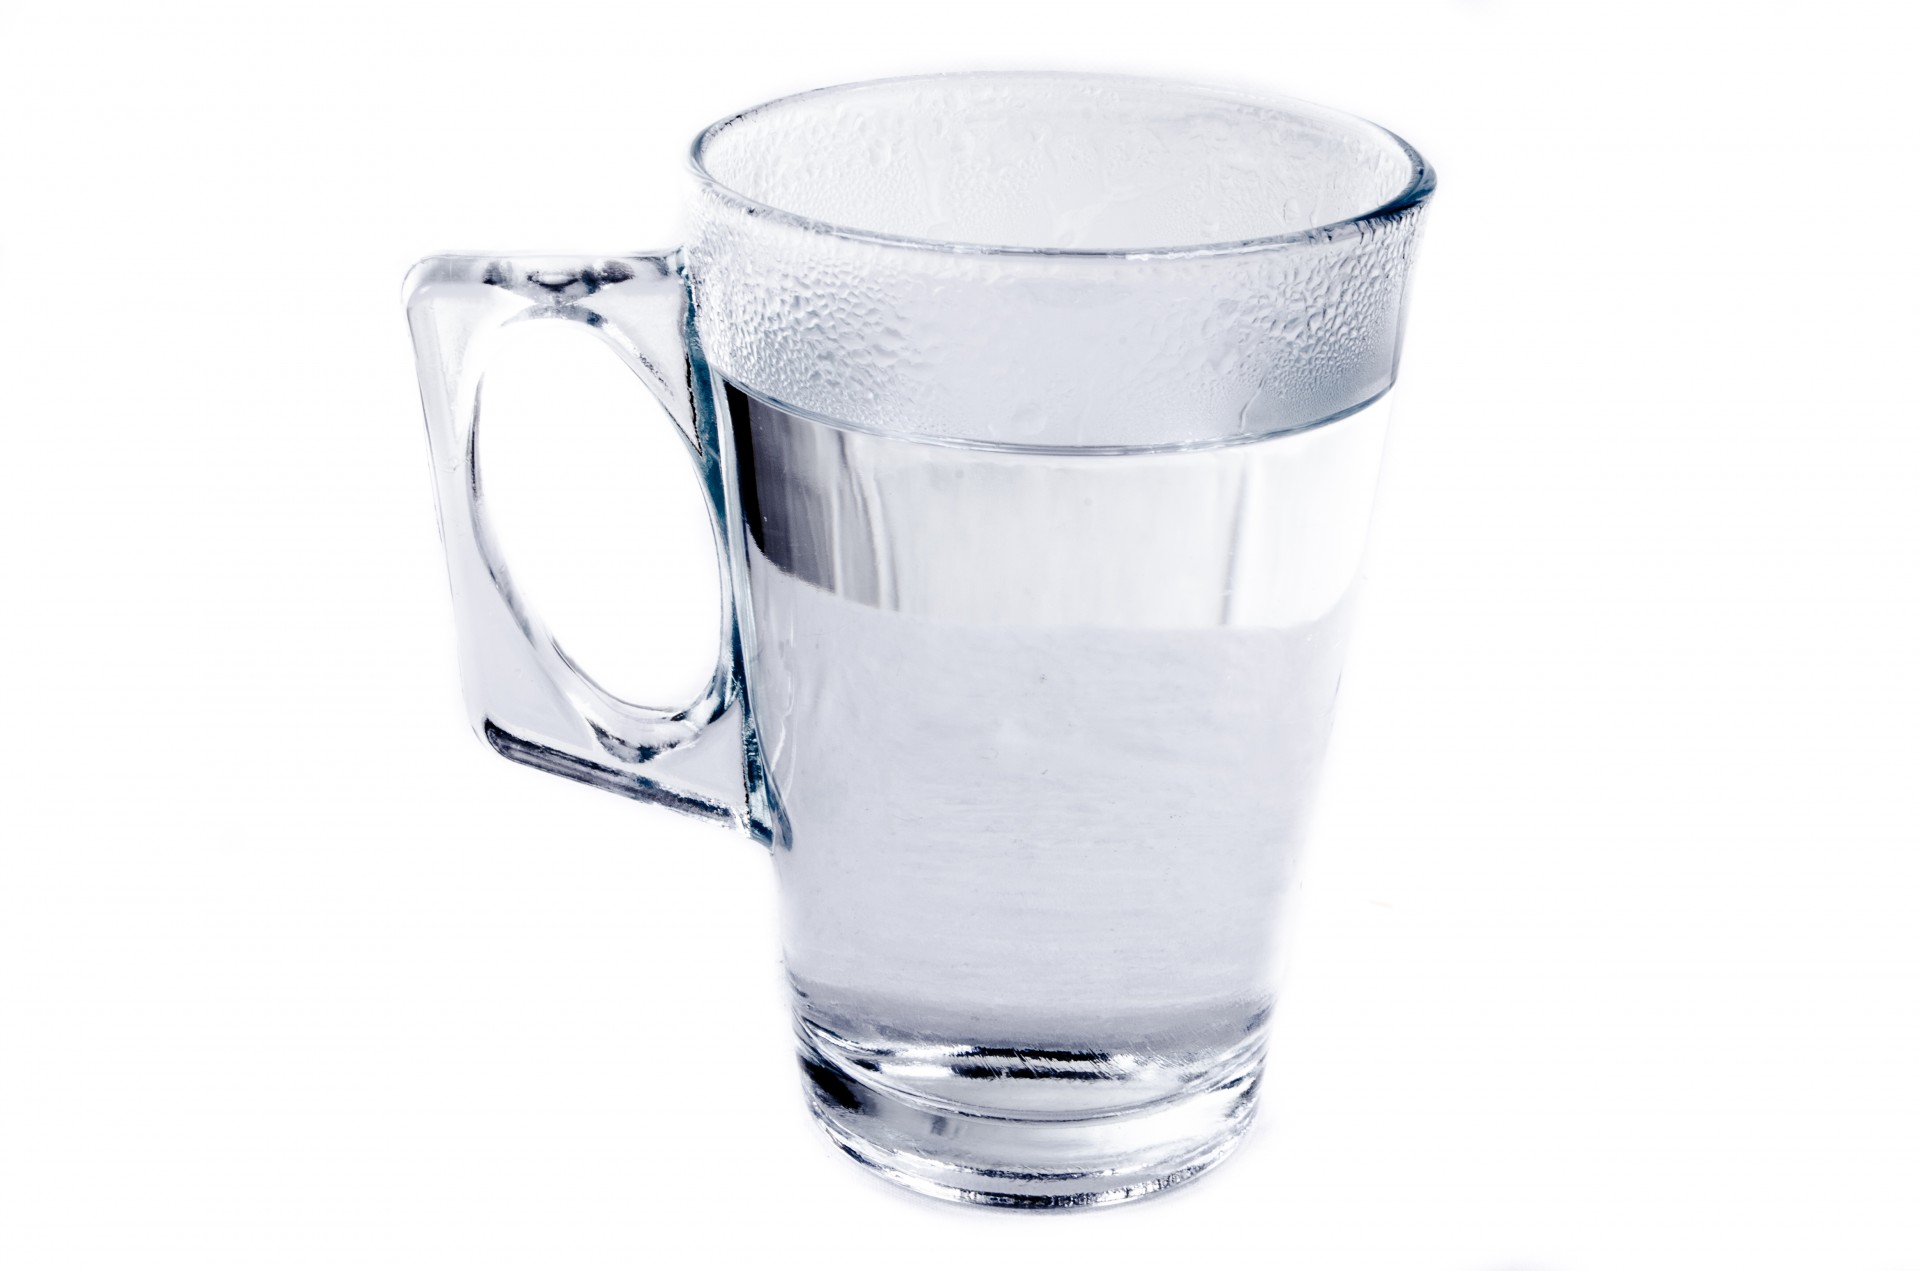 https://storage.needpix.com/rsynced_images/glass-cup-with-water.jpg